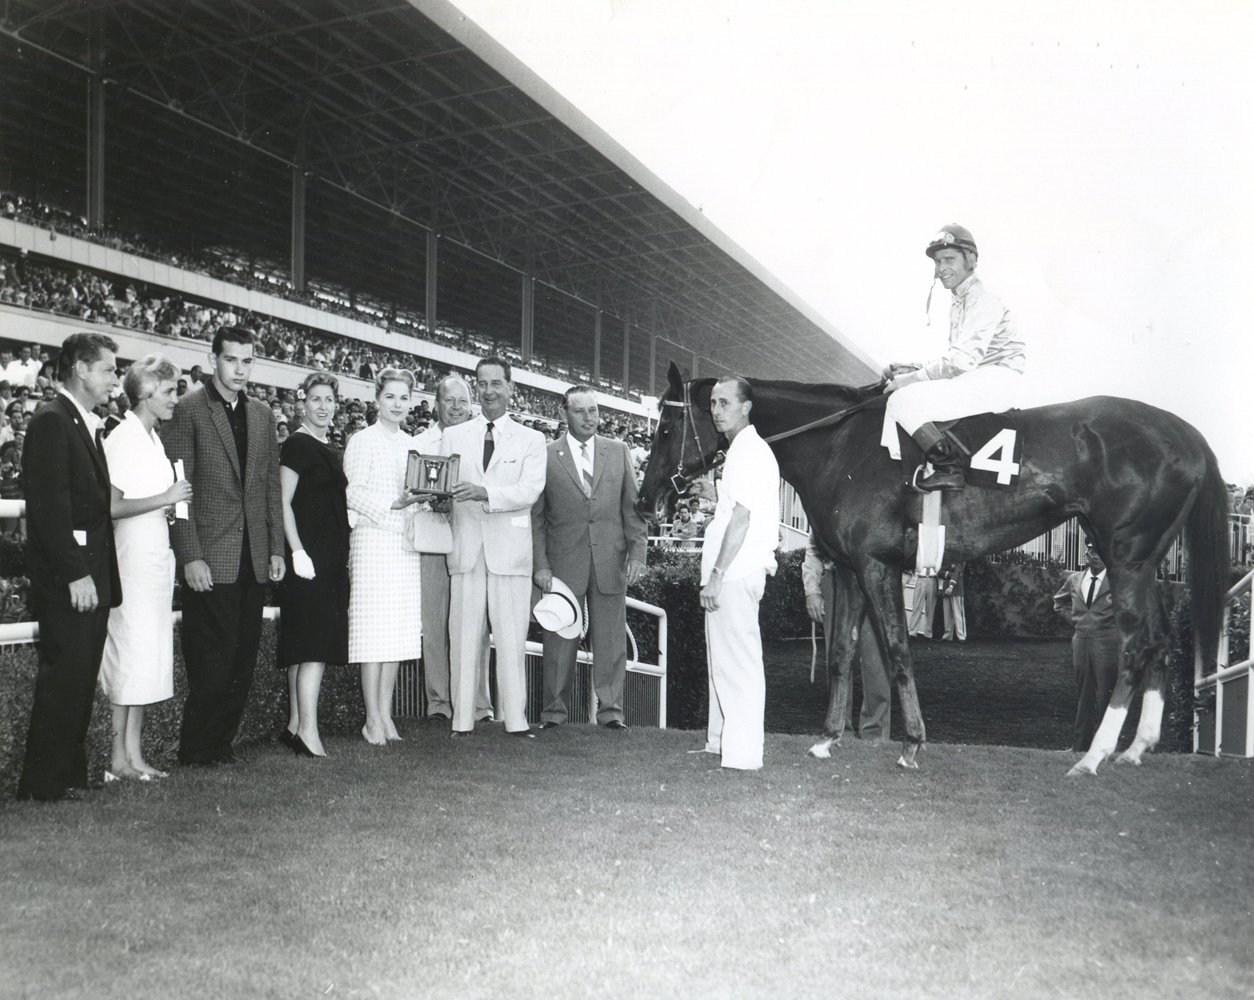 The winning connections of Silver Spoon in the winner's circle for the 1959 Cinema Handicap (Museum Collection)